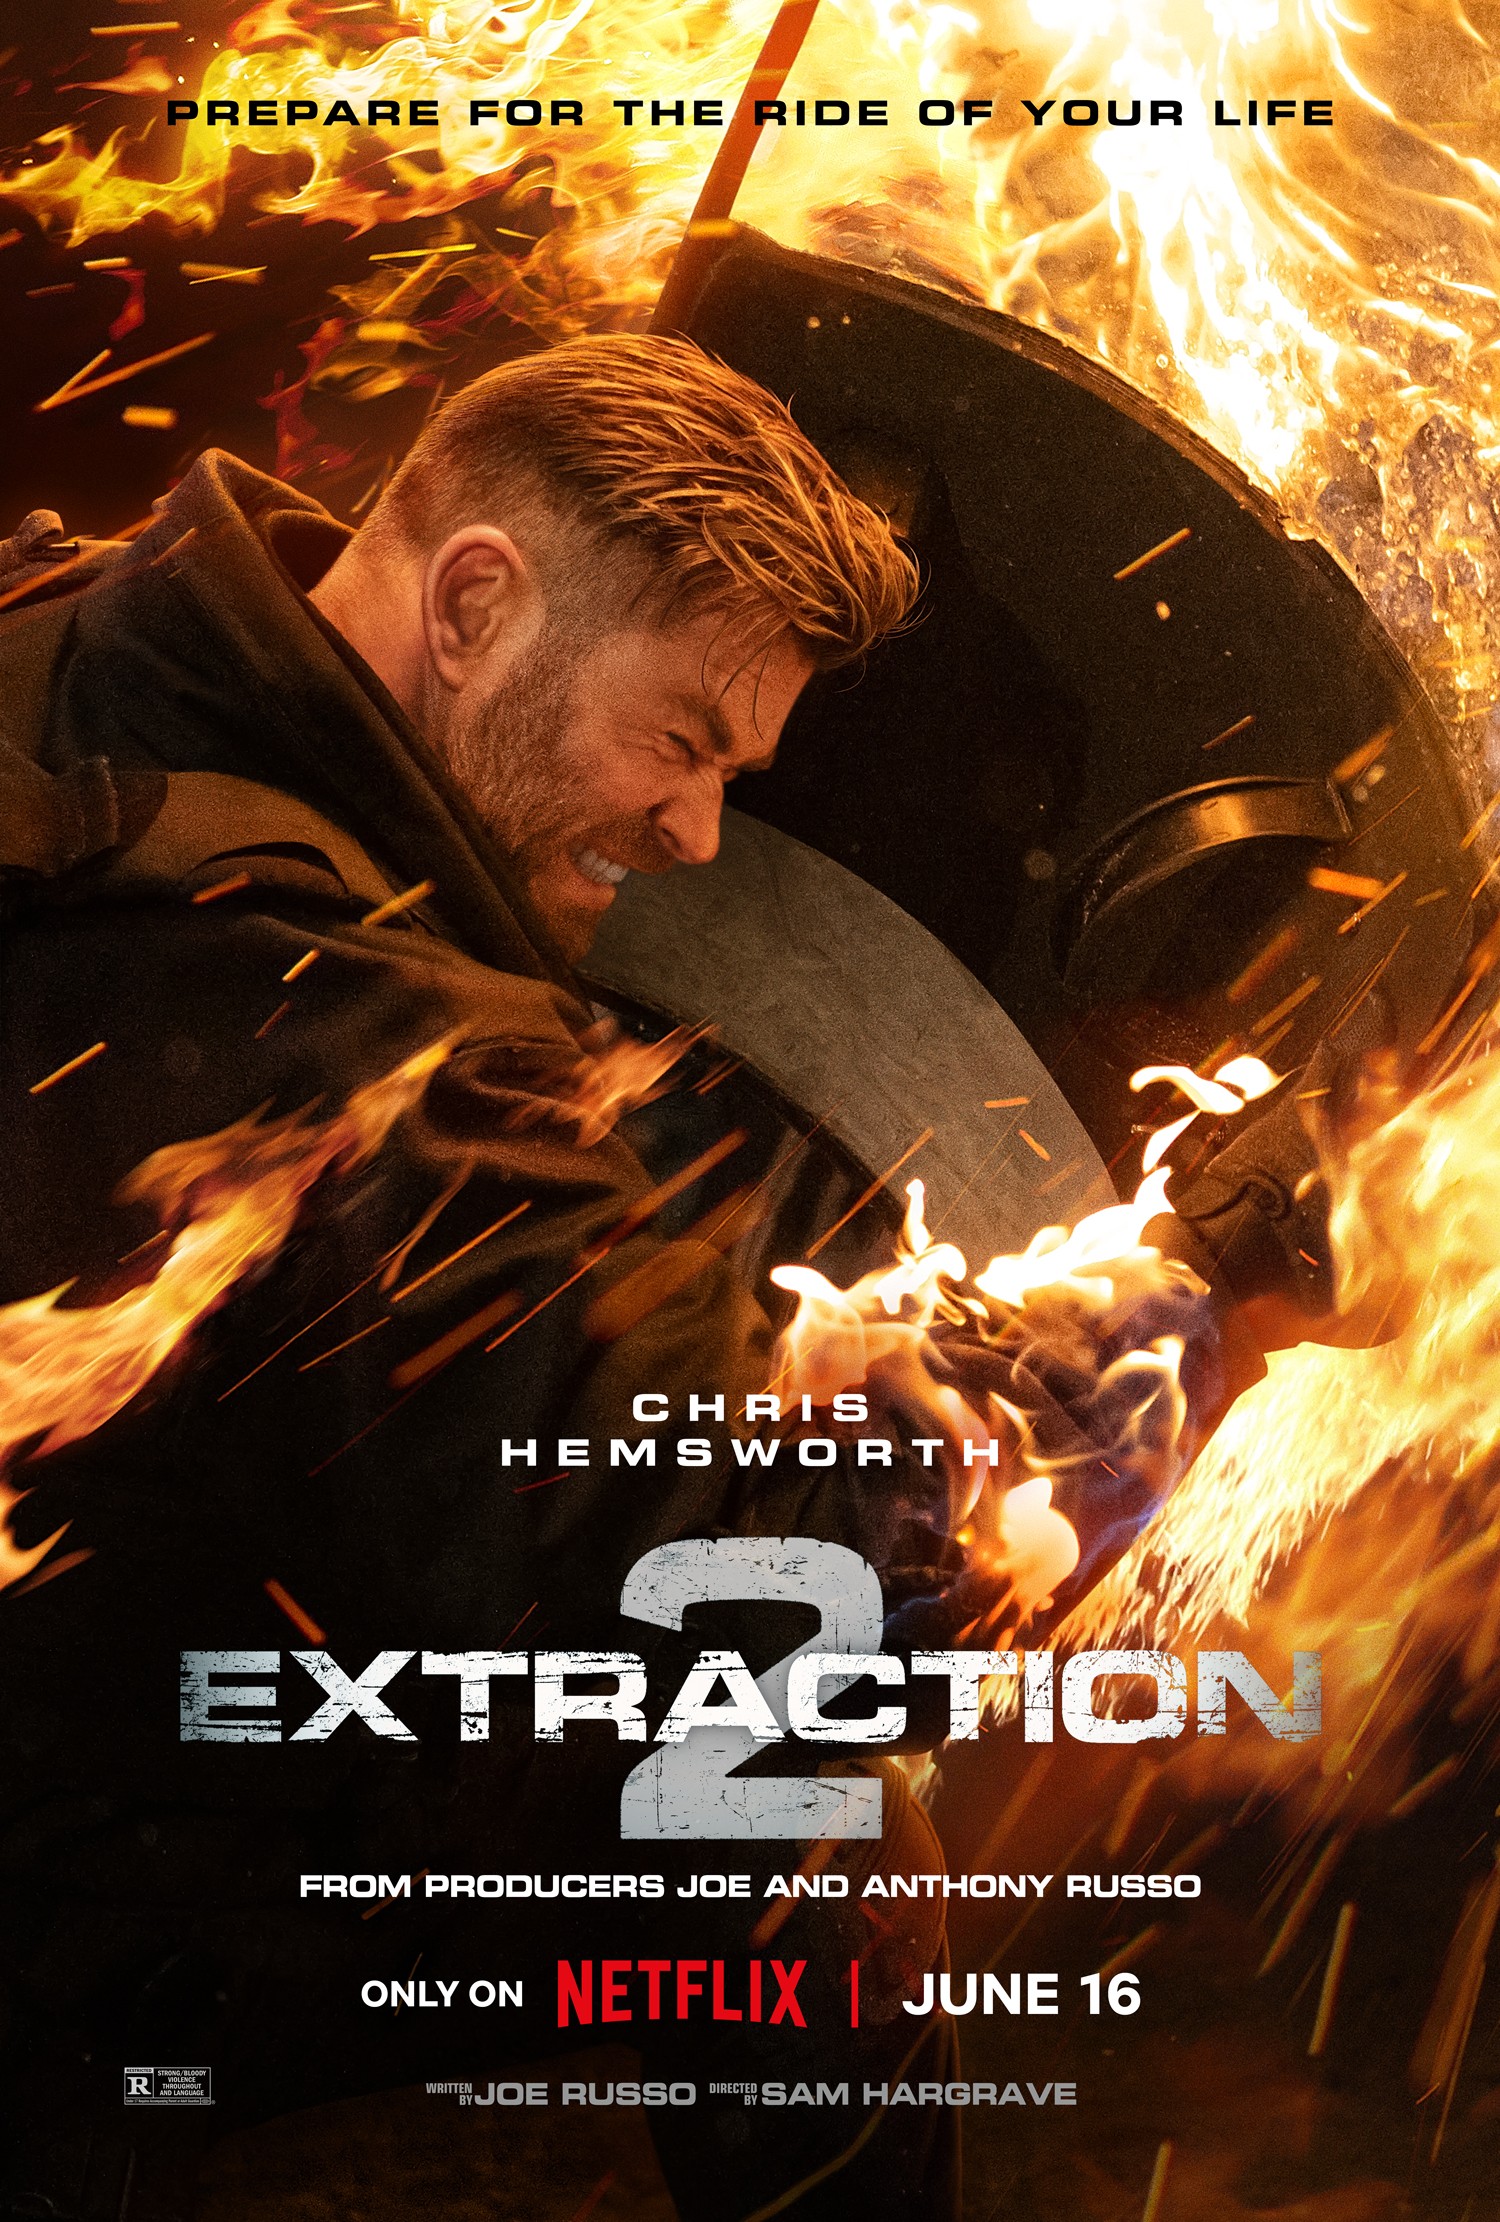 Extraction 2 Trailer: Check Out the Cast of the New Chris